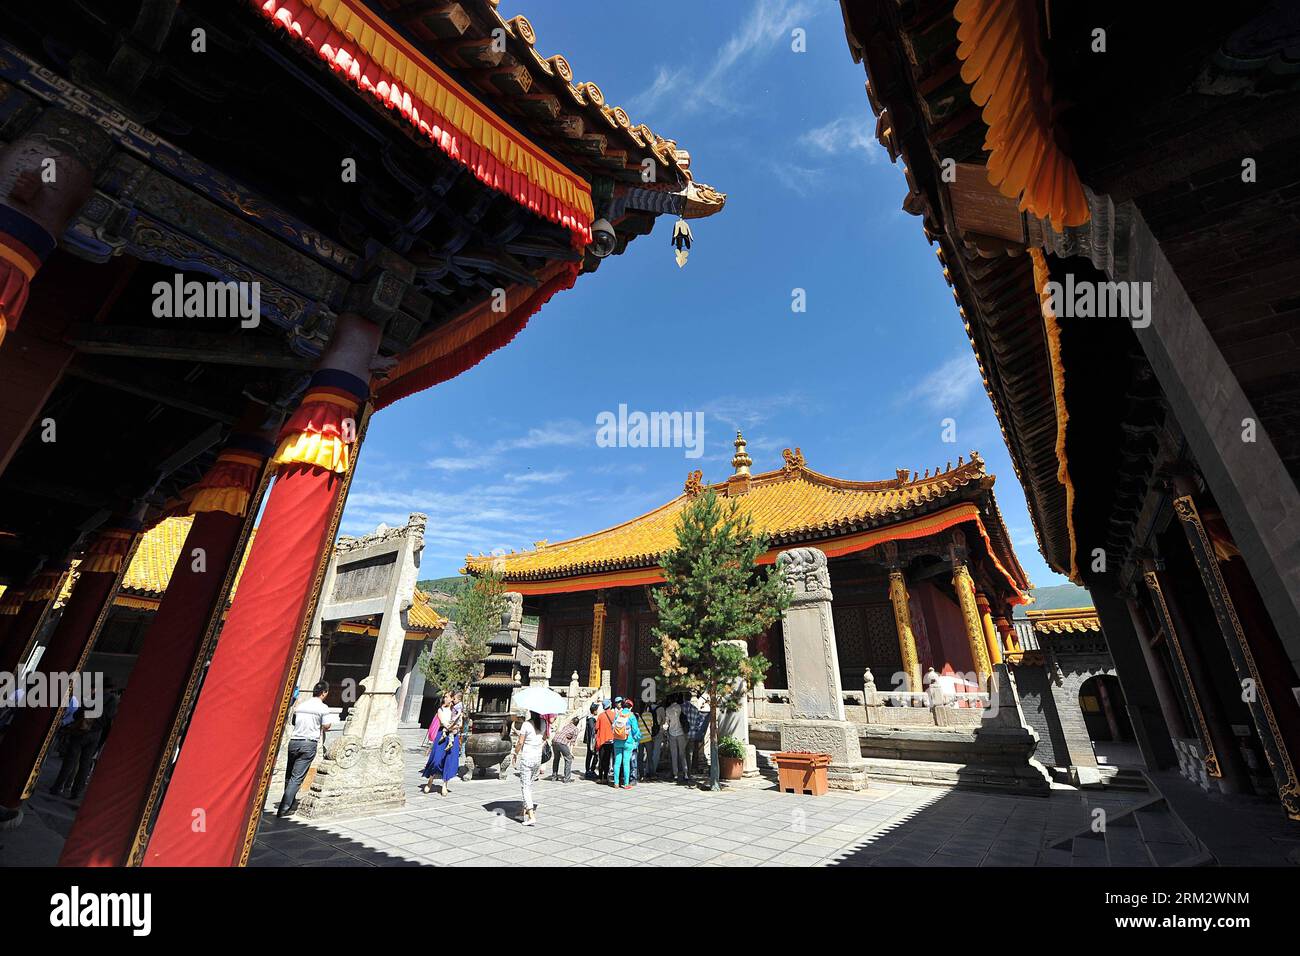 Bildnummer: 59909989  Datum: 26.06.2013  Copyright: imago/Xinhua MOUNT WUTAI, June 26, 2013 - Tourists visit a temple on Mount Wutai, one of four sacred Buddhist mountains in China, in north China s Shanxi Province, June 26, 2013. Added to UNESCO s World Heritage List in 2009, Mount Wutai is home to about 50 Buddhist temples built between the 1st century AD and the early 20th century. (Xinhua/Zhan Yan) (ry) CHINA-SHANXI-MOUNT WUTAI (CN) PUBLICATIONxNOTxINxCHN Gesellschaft Religion Fotostory xjh x0x 2013 quer     59909989 Date 26 06 2013 Copyright Imago XINHUA Mount Wutai June 26 2013 tourists Stock Photo